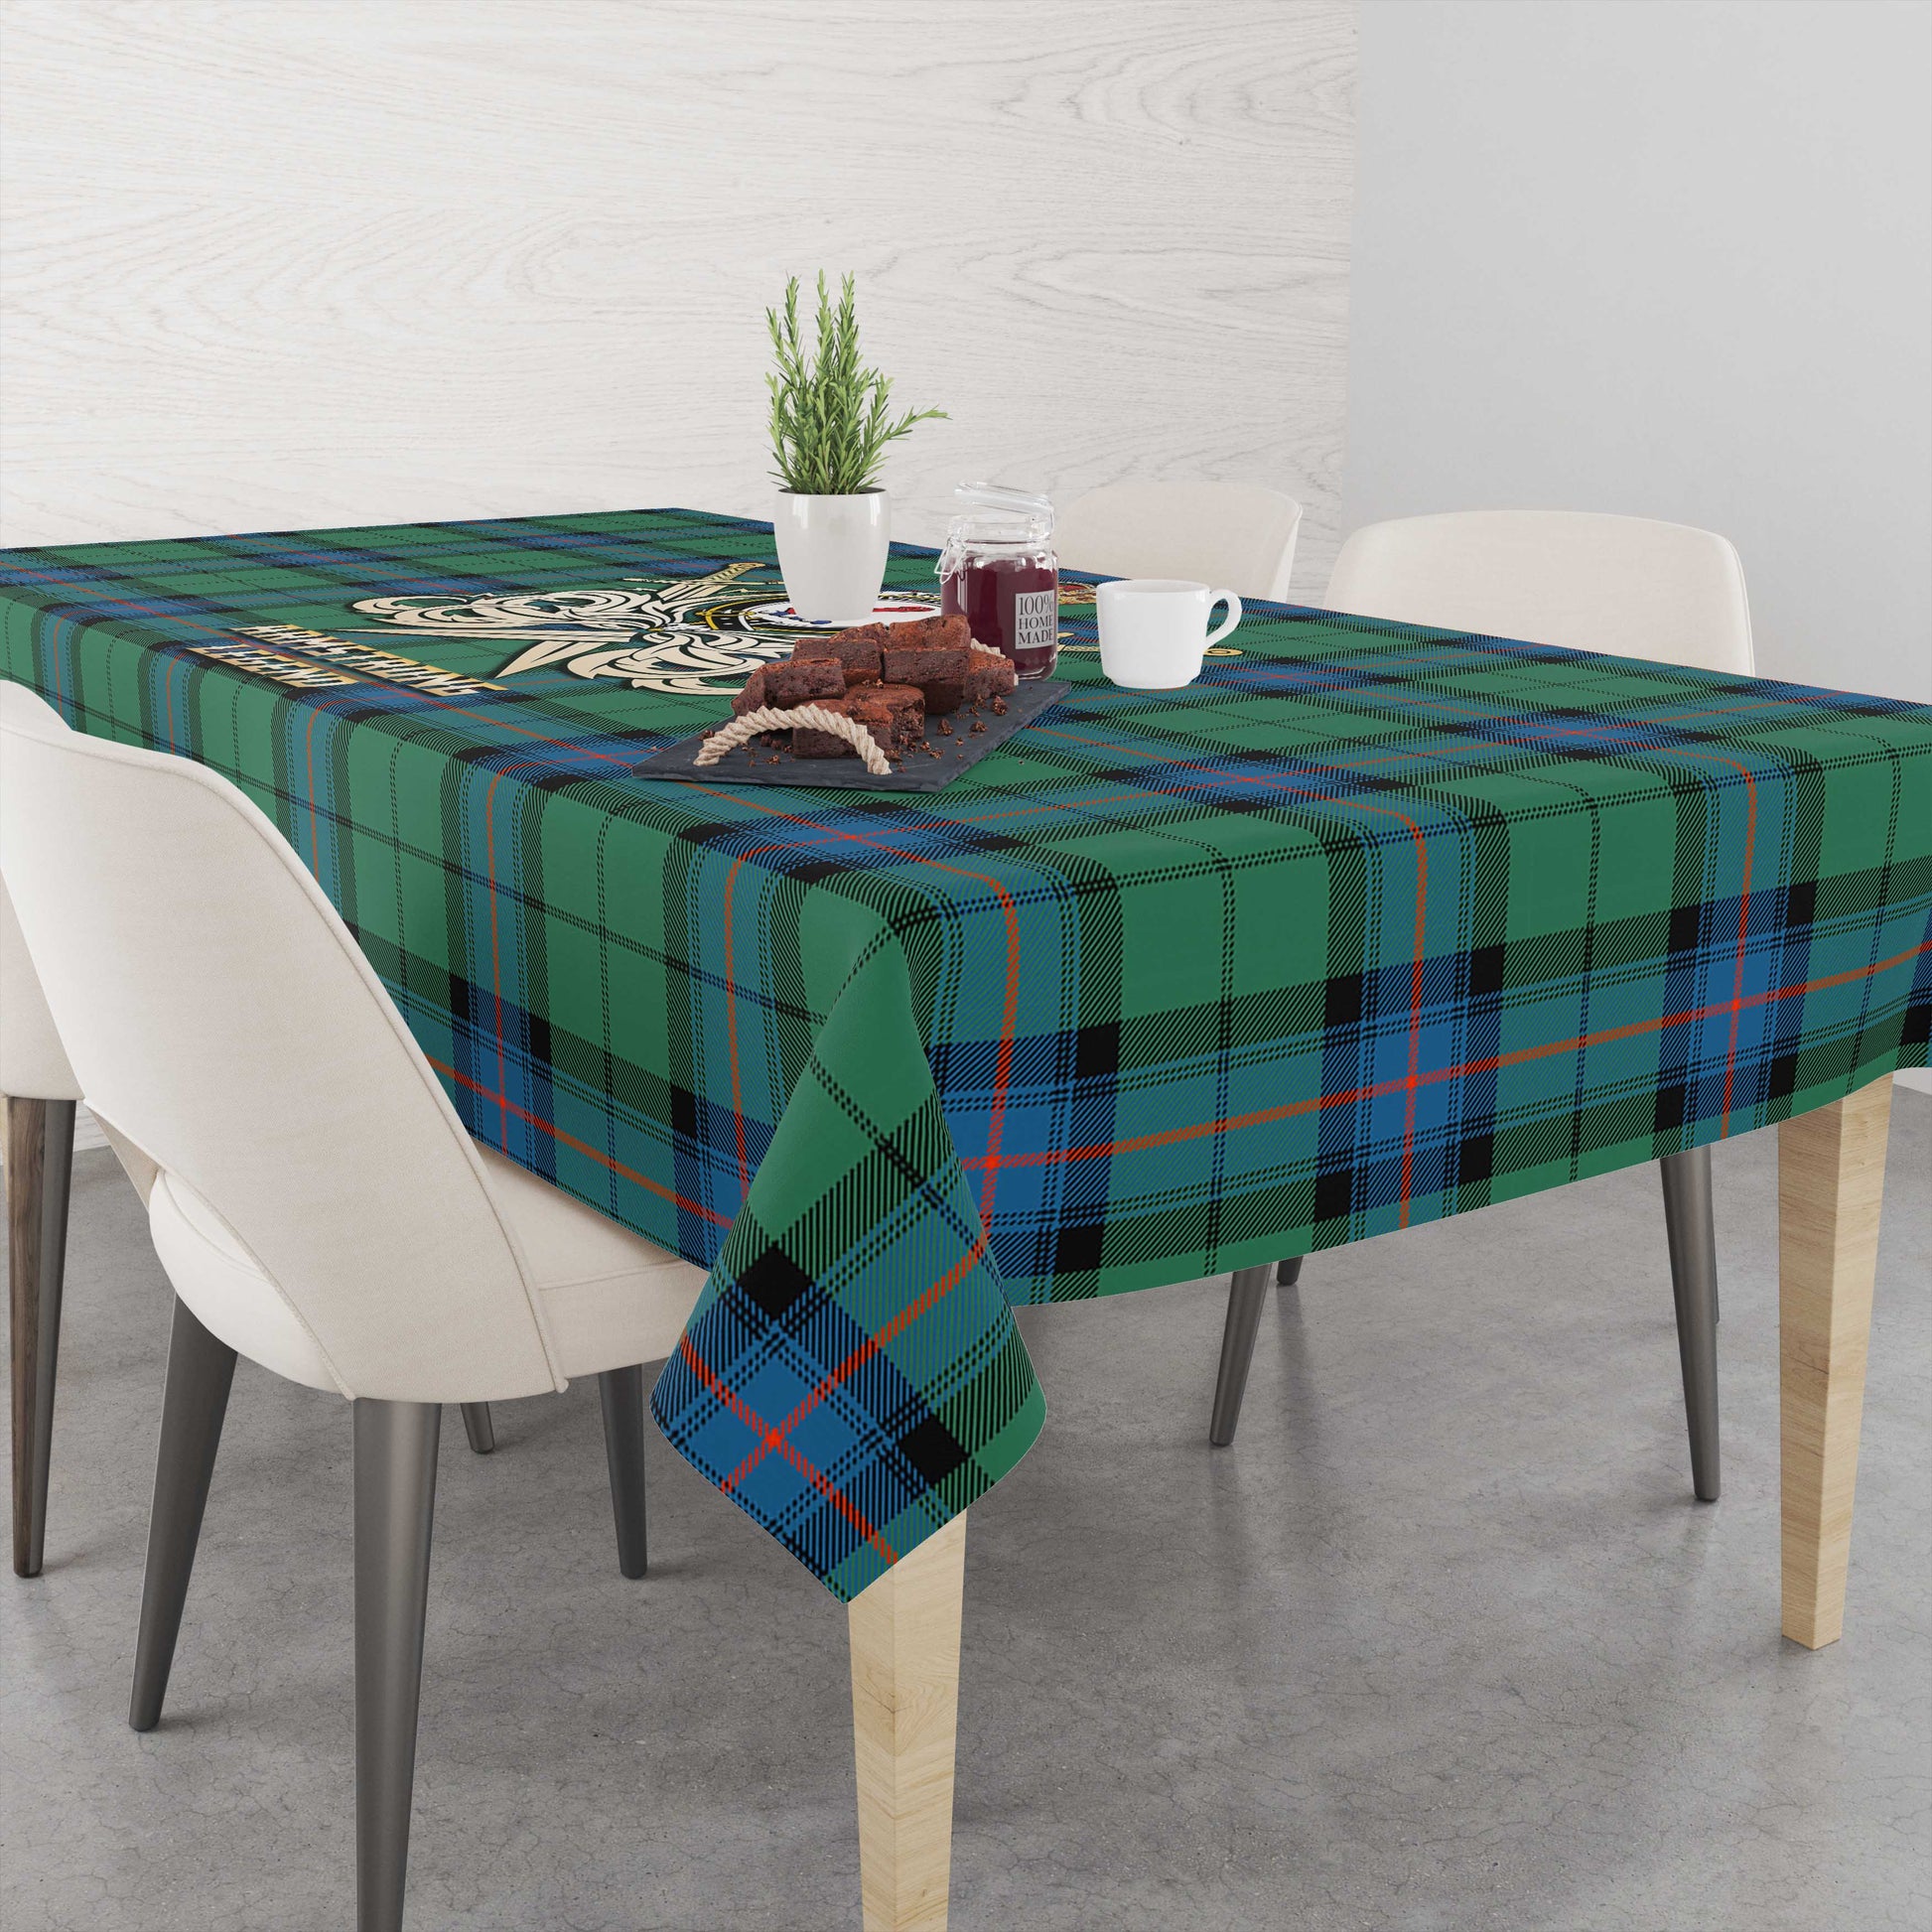 Tartan Vibes Clothing Armstrong Ancient Tartan Tablecloth with Clan Crest and the Golden Sword of Courageous Legacy